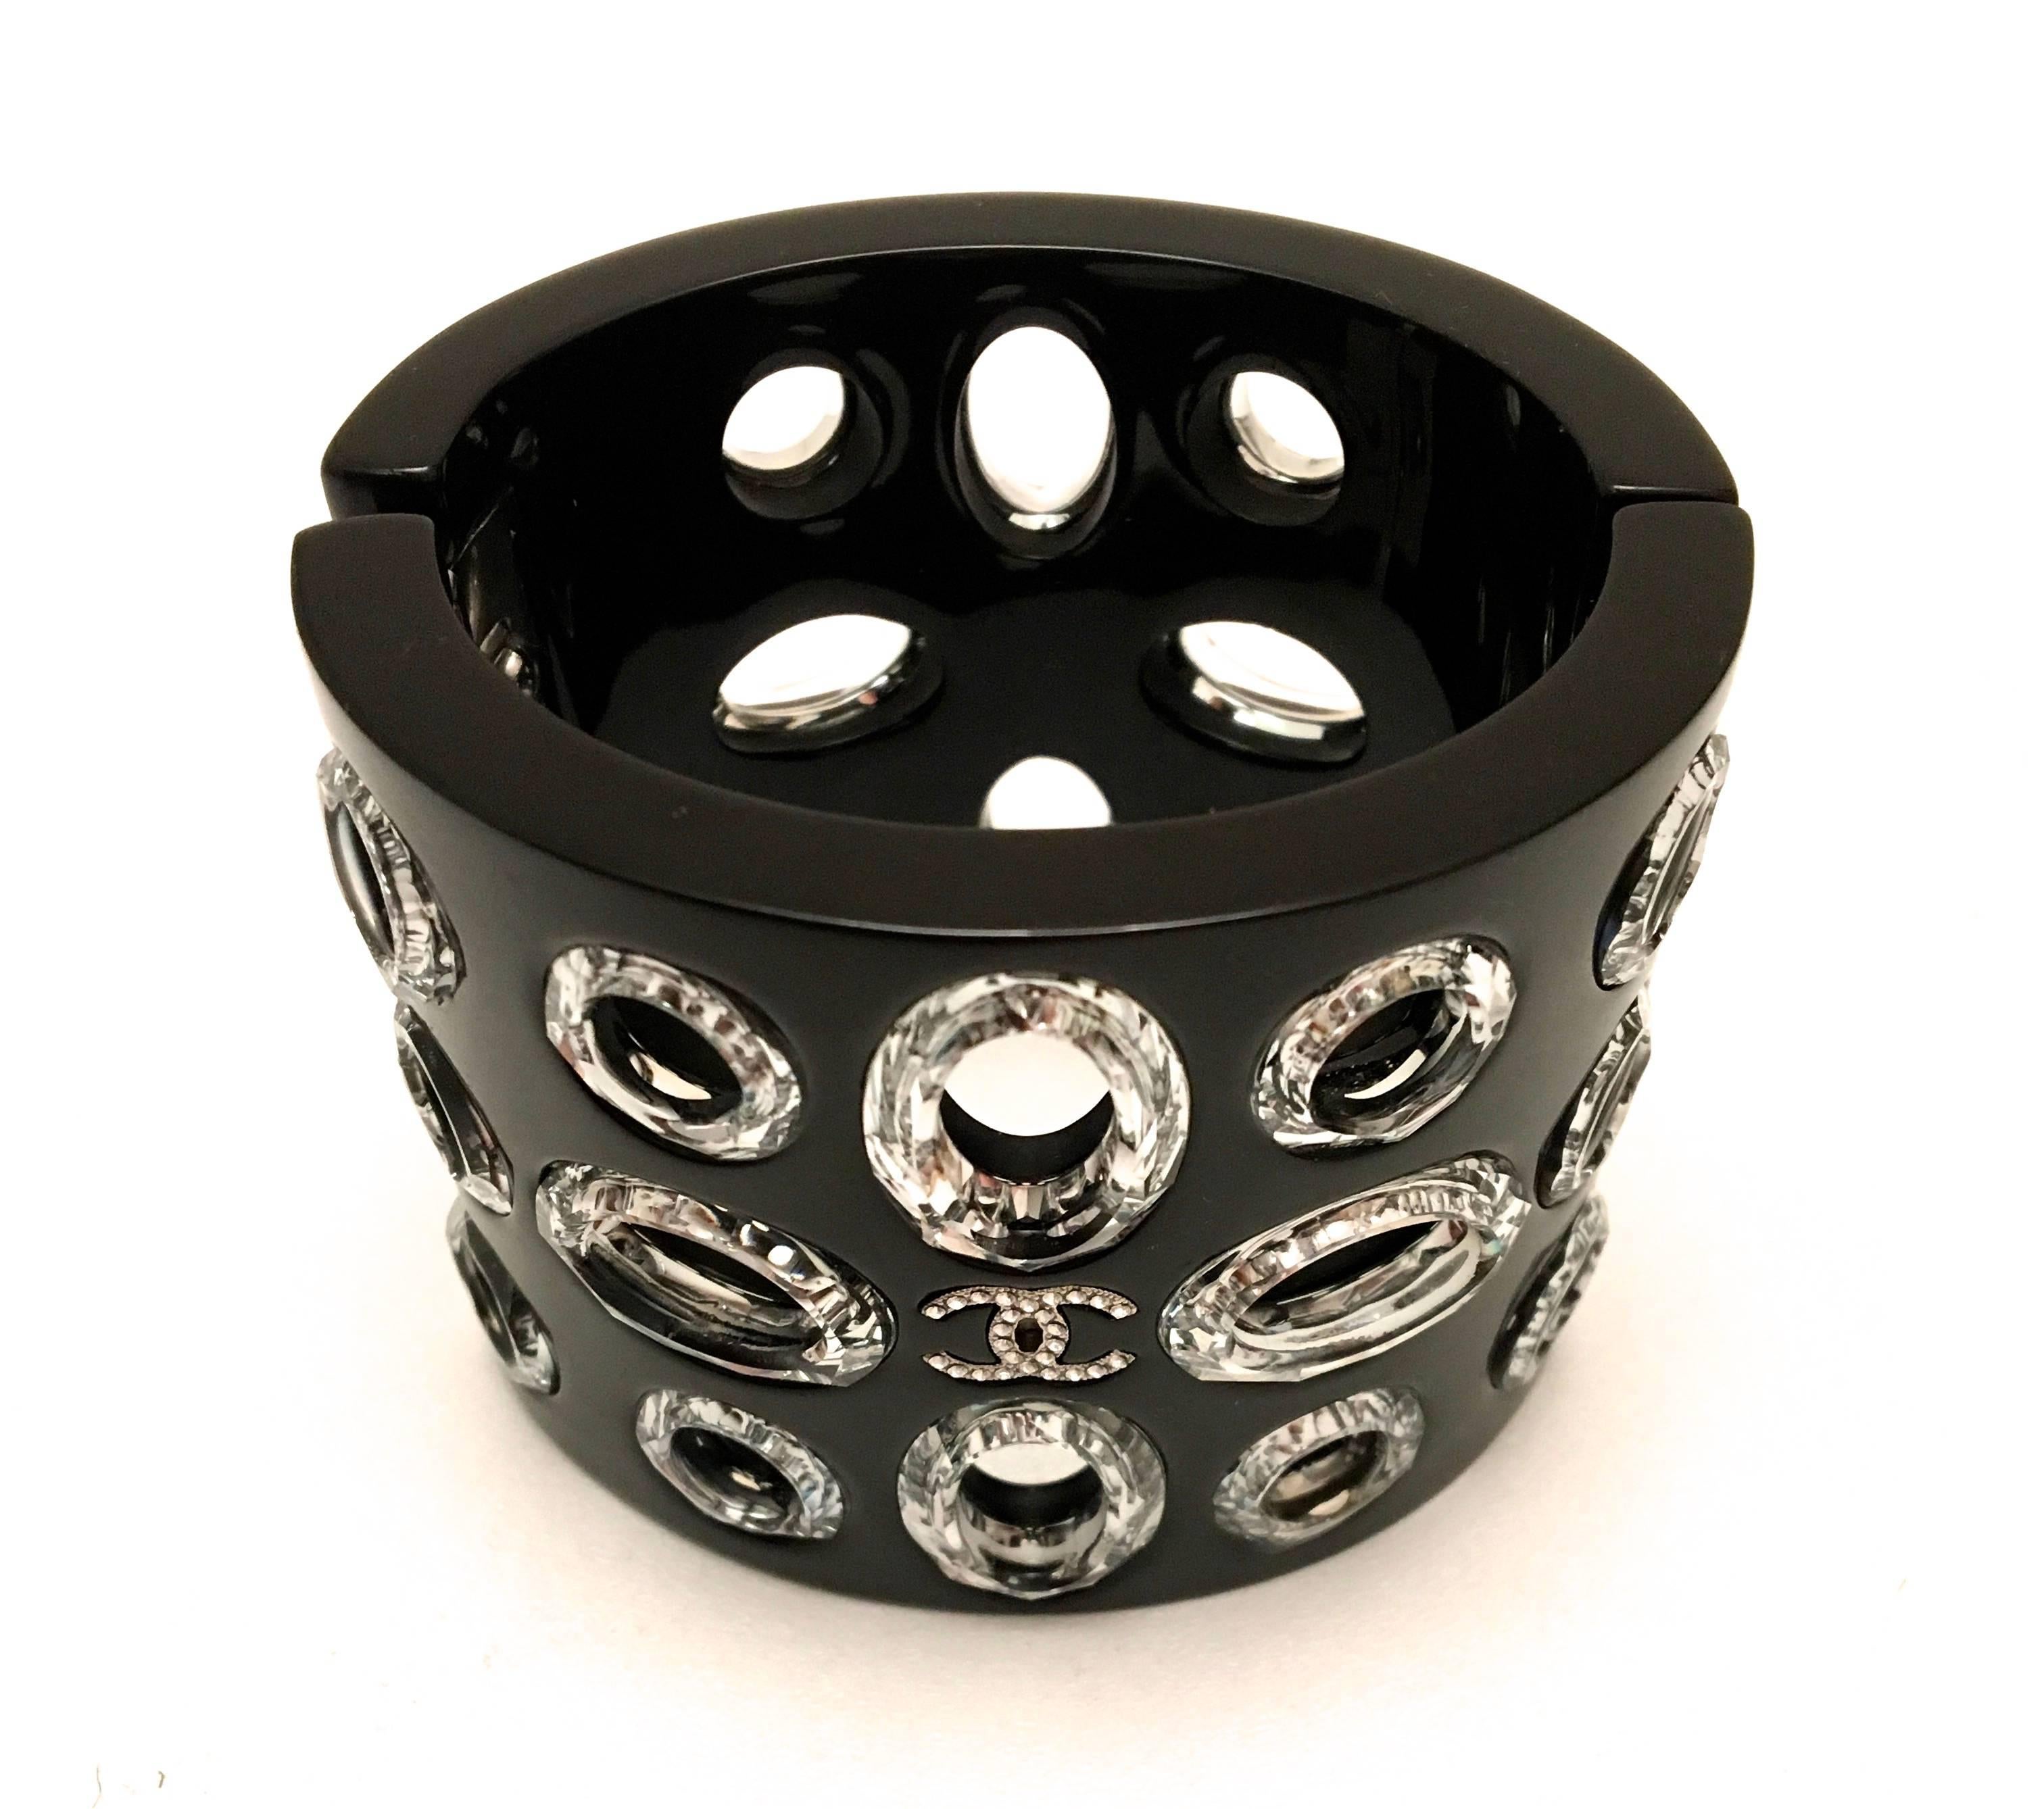 Presented here is a beautiful cuff bracelet from Chanel. This extra long cuff bracelet is comprised of a black lucite frame with small circles with encased crystals. There is also a highlighted series of rhinestones forming a CC logo. The bracelet